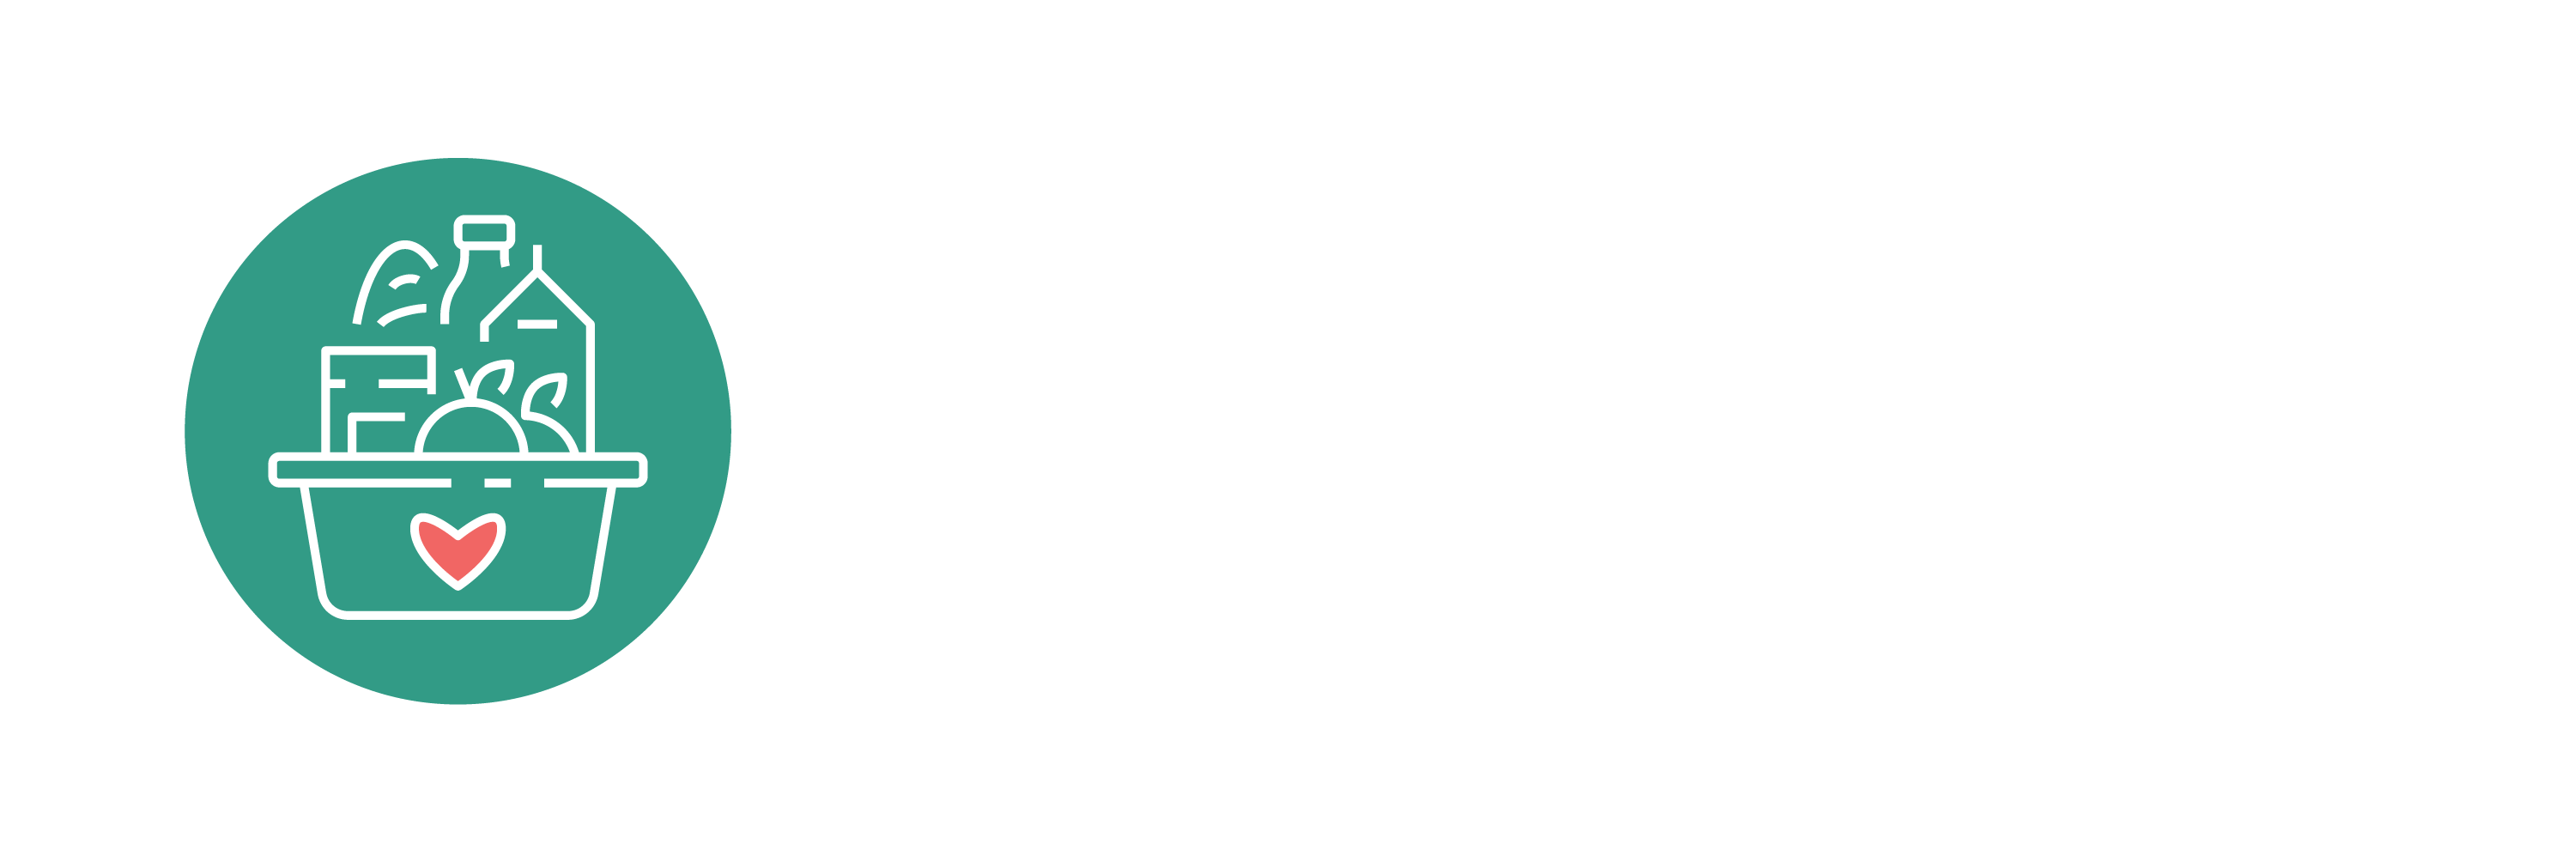 Goods and Grace